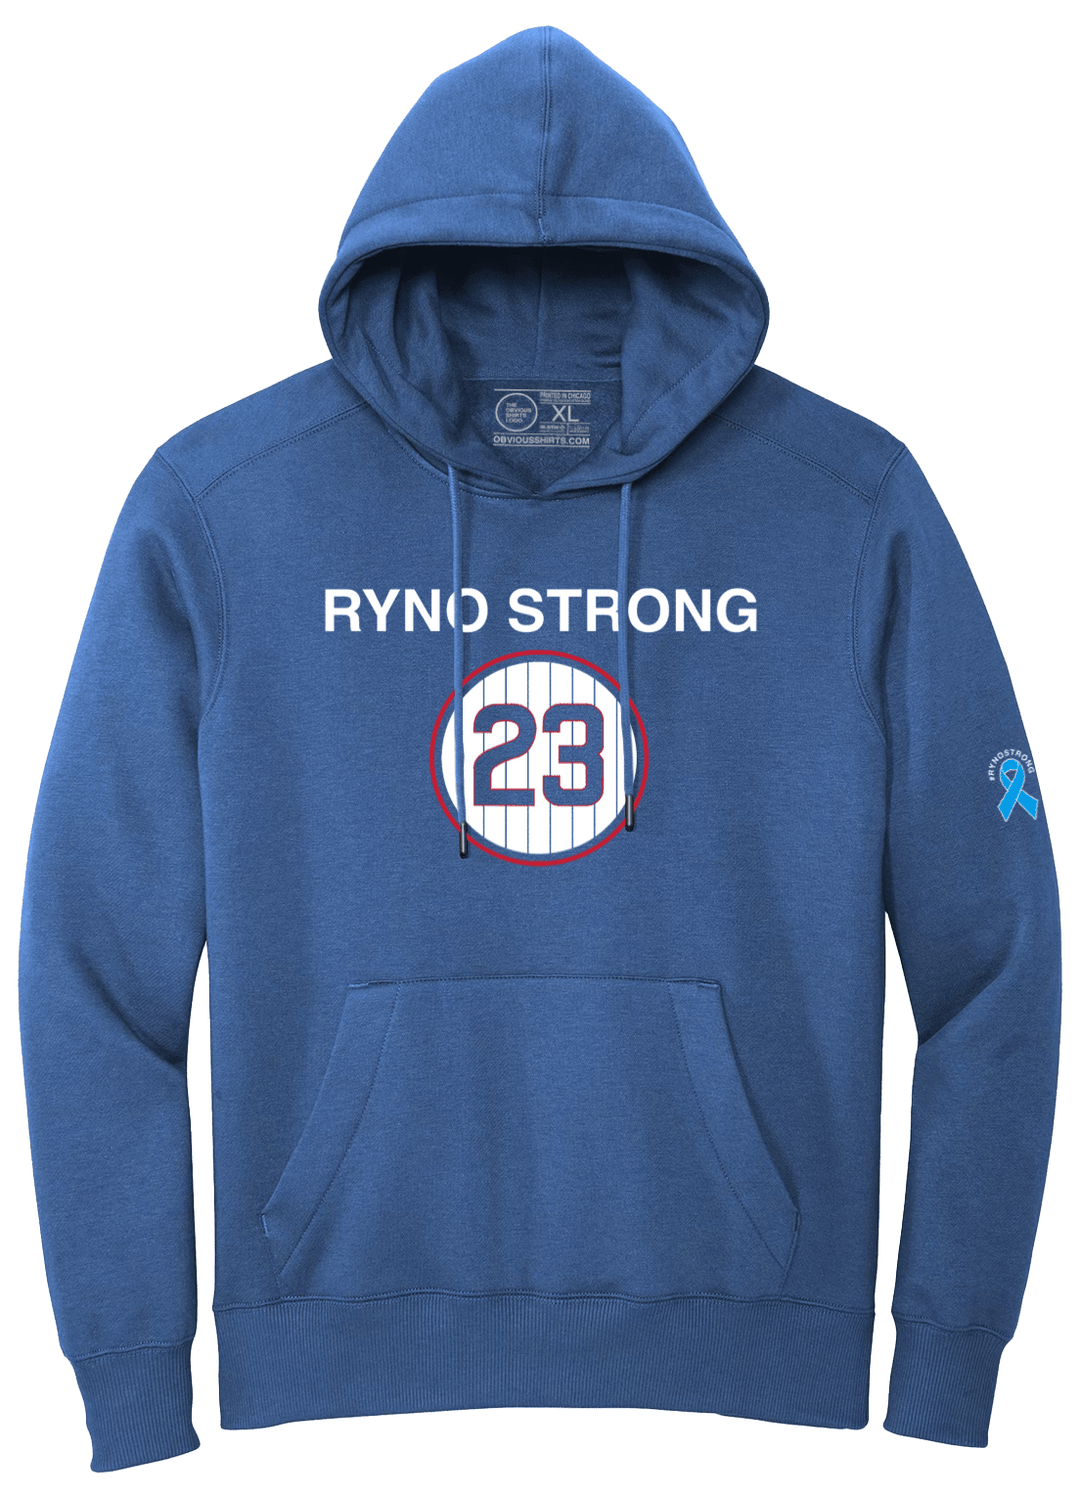 RYNO STRONG 23. (HOODED SWEATSHIRT) - OBVIOUS SHIRTS